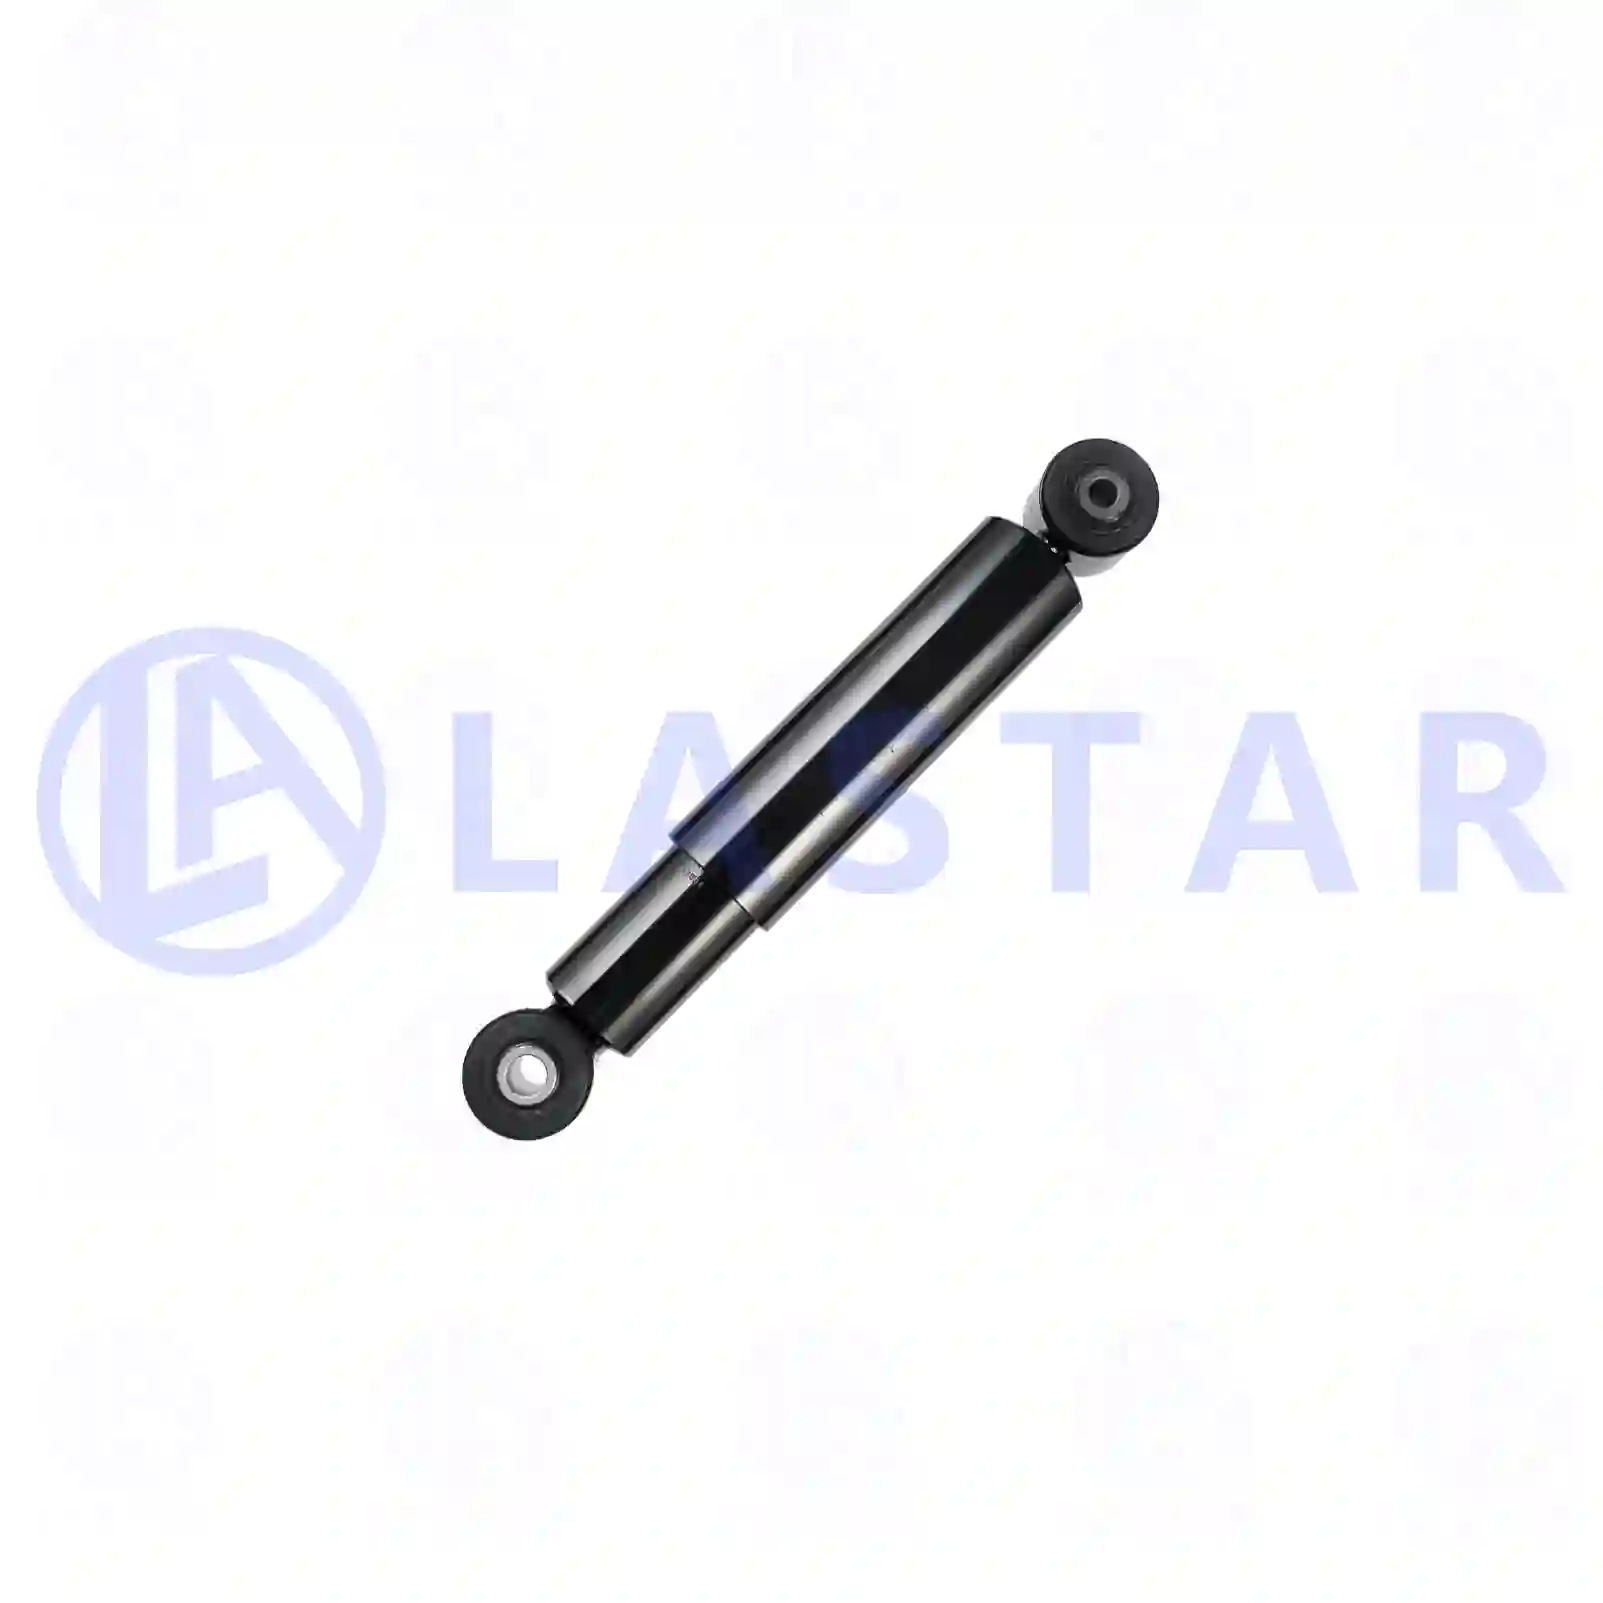 Shock absorber, 77727863, 0063268200, 3753260100, 9703260400, 9743260000, 9743260400, ZG41596-0008 ||  77727863 Lastar Spare Part | Truck Spare Parts, Auotomotive Spare Parts Shock absorber, 77727863, 0063268200, 3753260100, 9703260400, 9743260000, 9743260400, ZG41596-0008 ||  77727863 Lastar Spare Part | Truck Spare Parts, Auotomotive Spare Parts